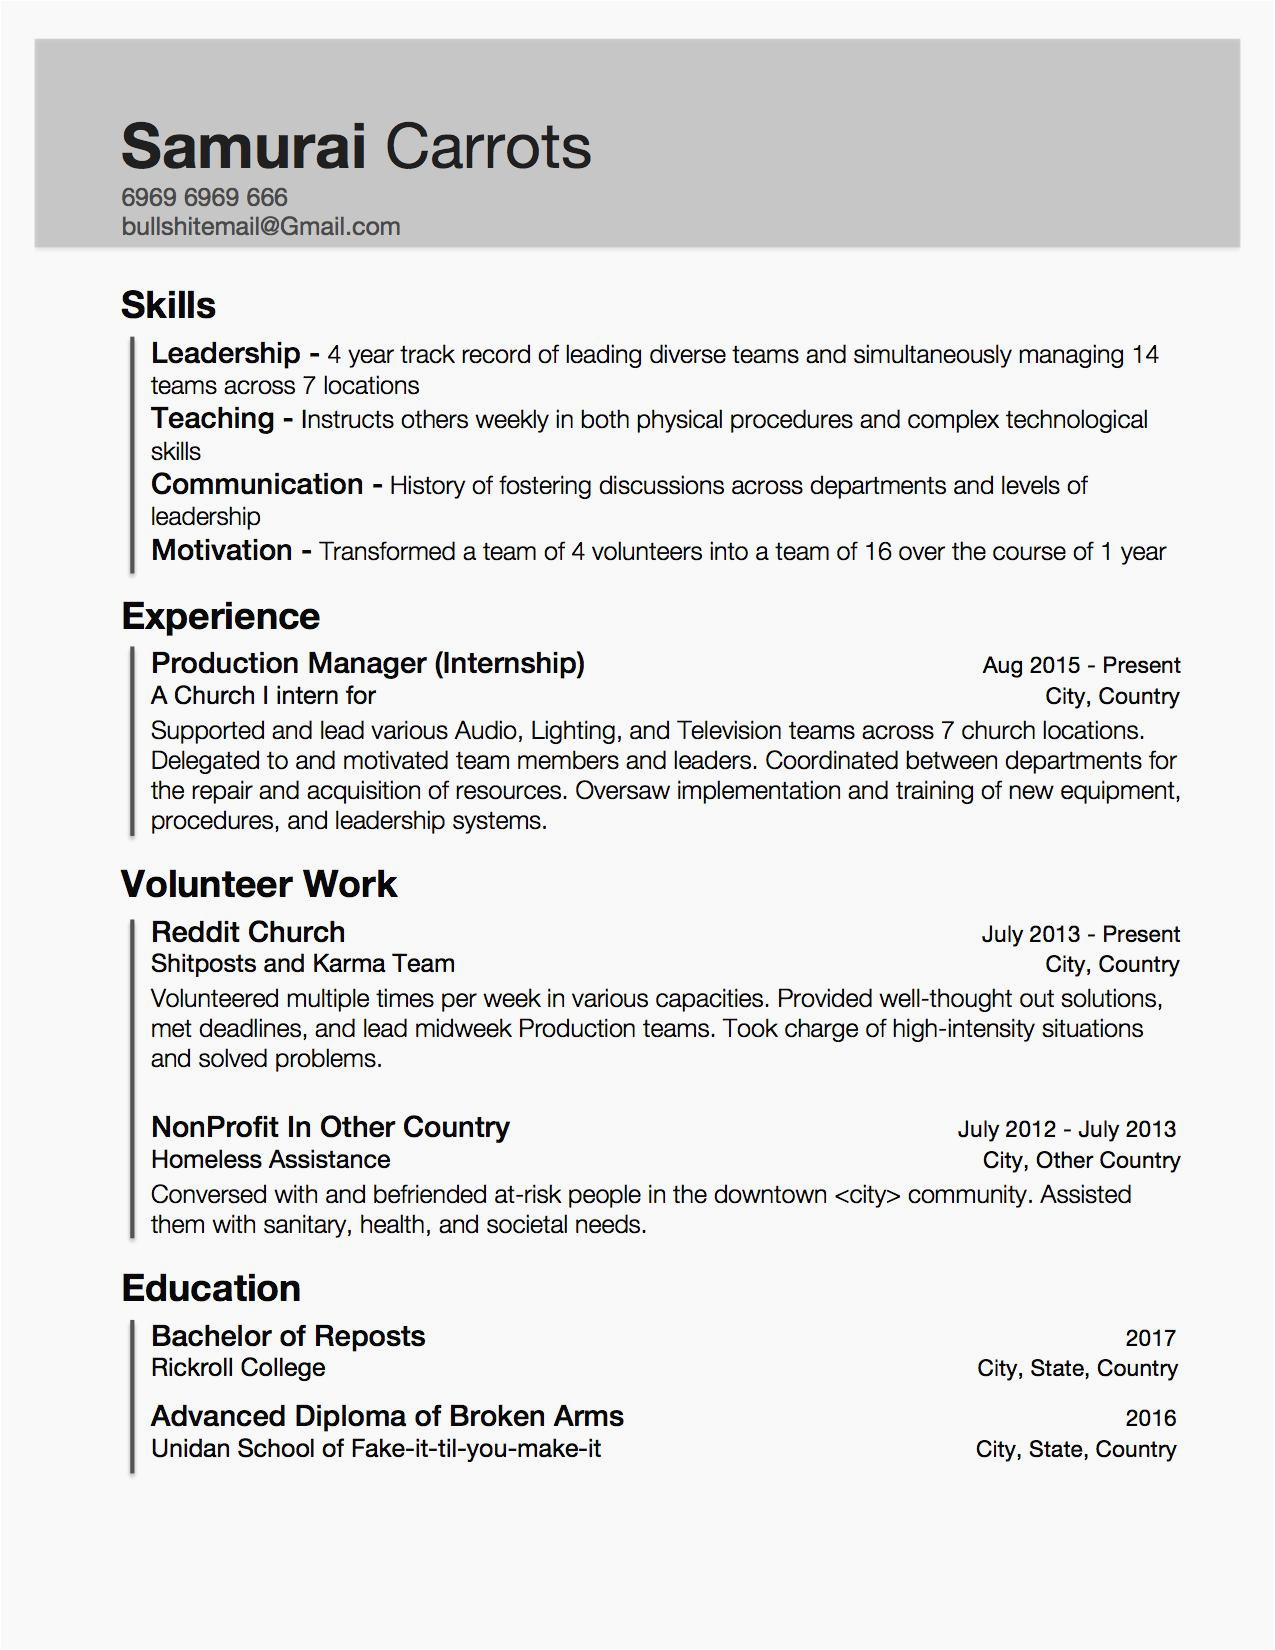 Resume Template for Little Work Experience Resume Samples with Little Work Experience